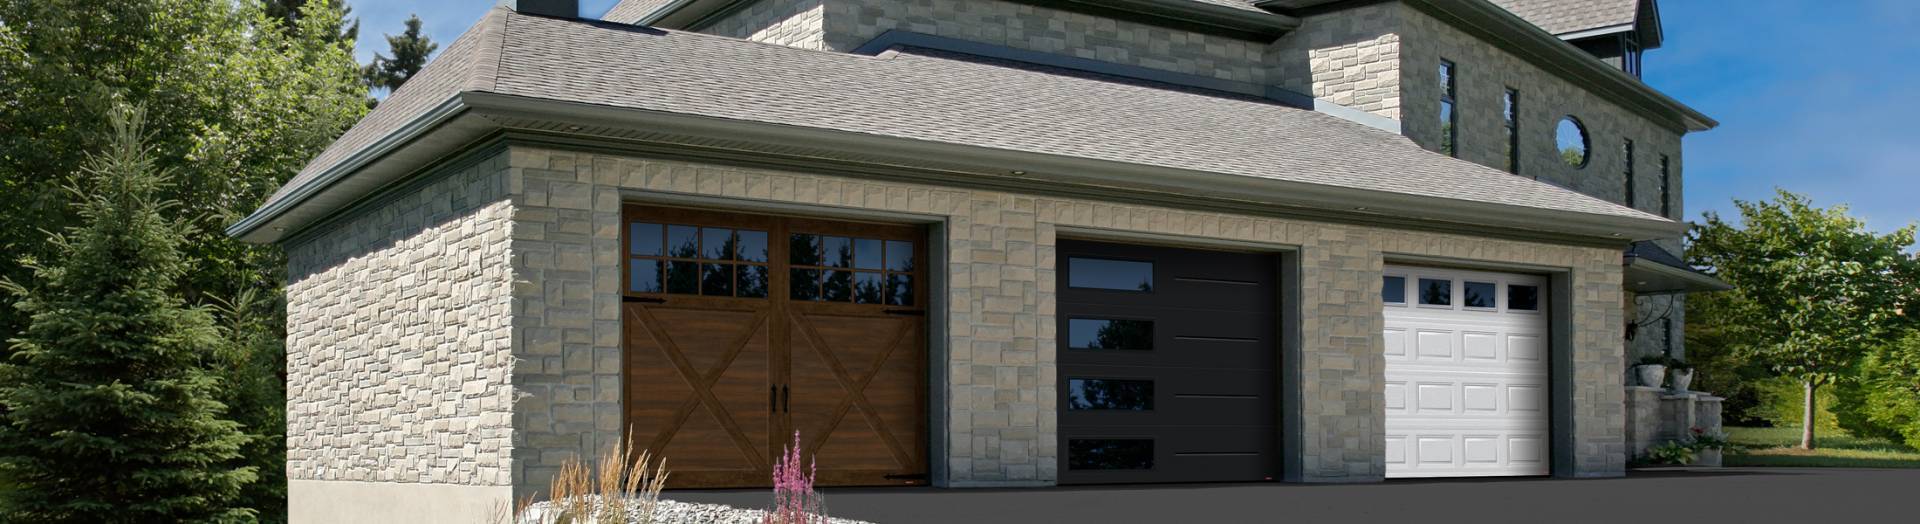 Sample house showing the 3 styles of garage doors: Carriage House, Contemporay and Traditional 